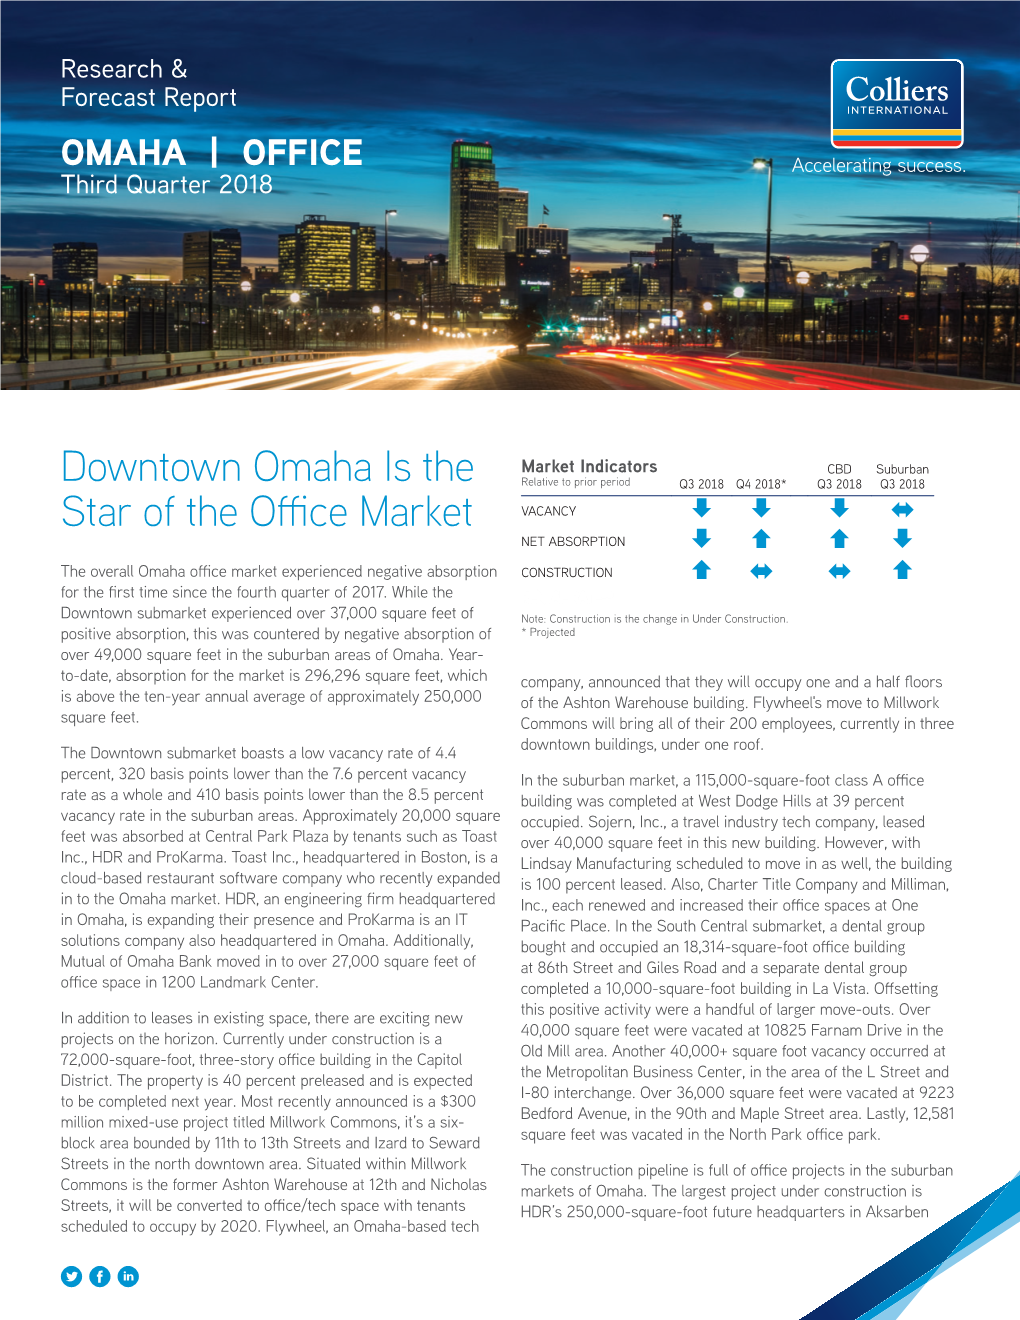 Downtown Omaha Is the Star of the Office Market